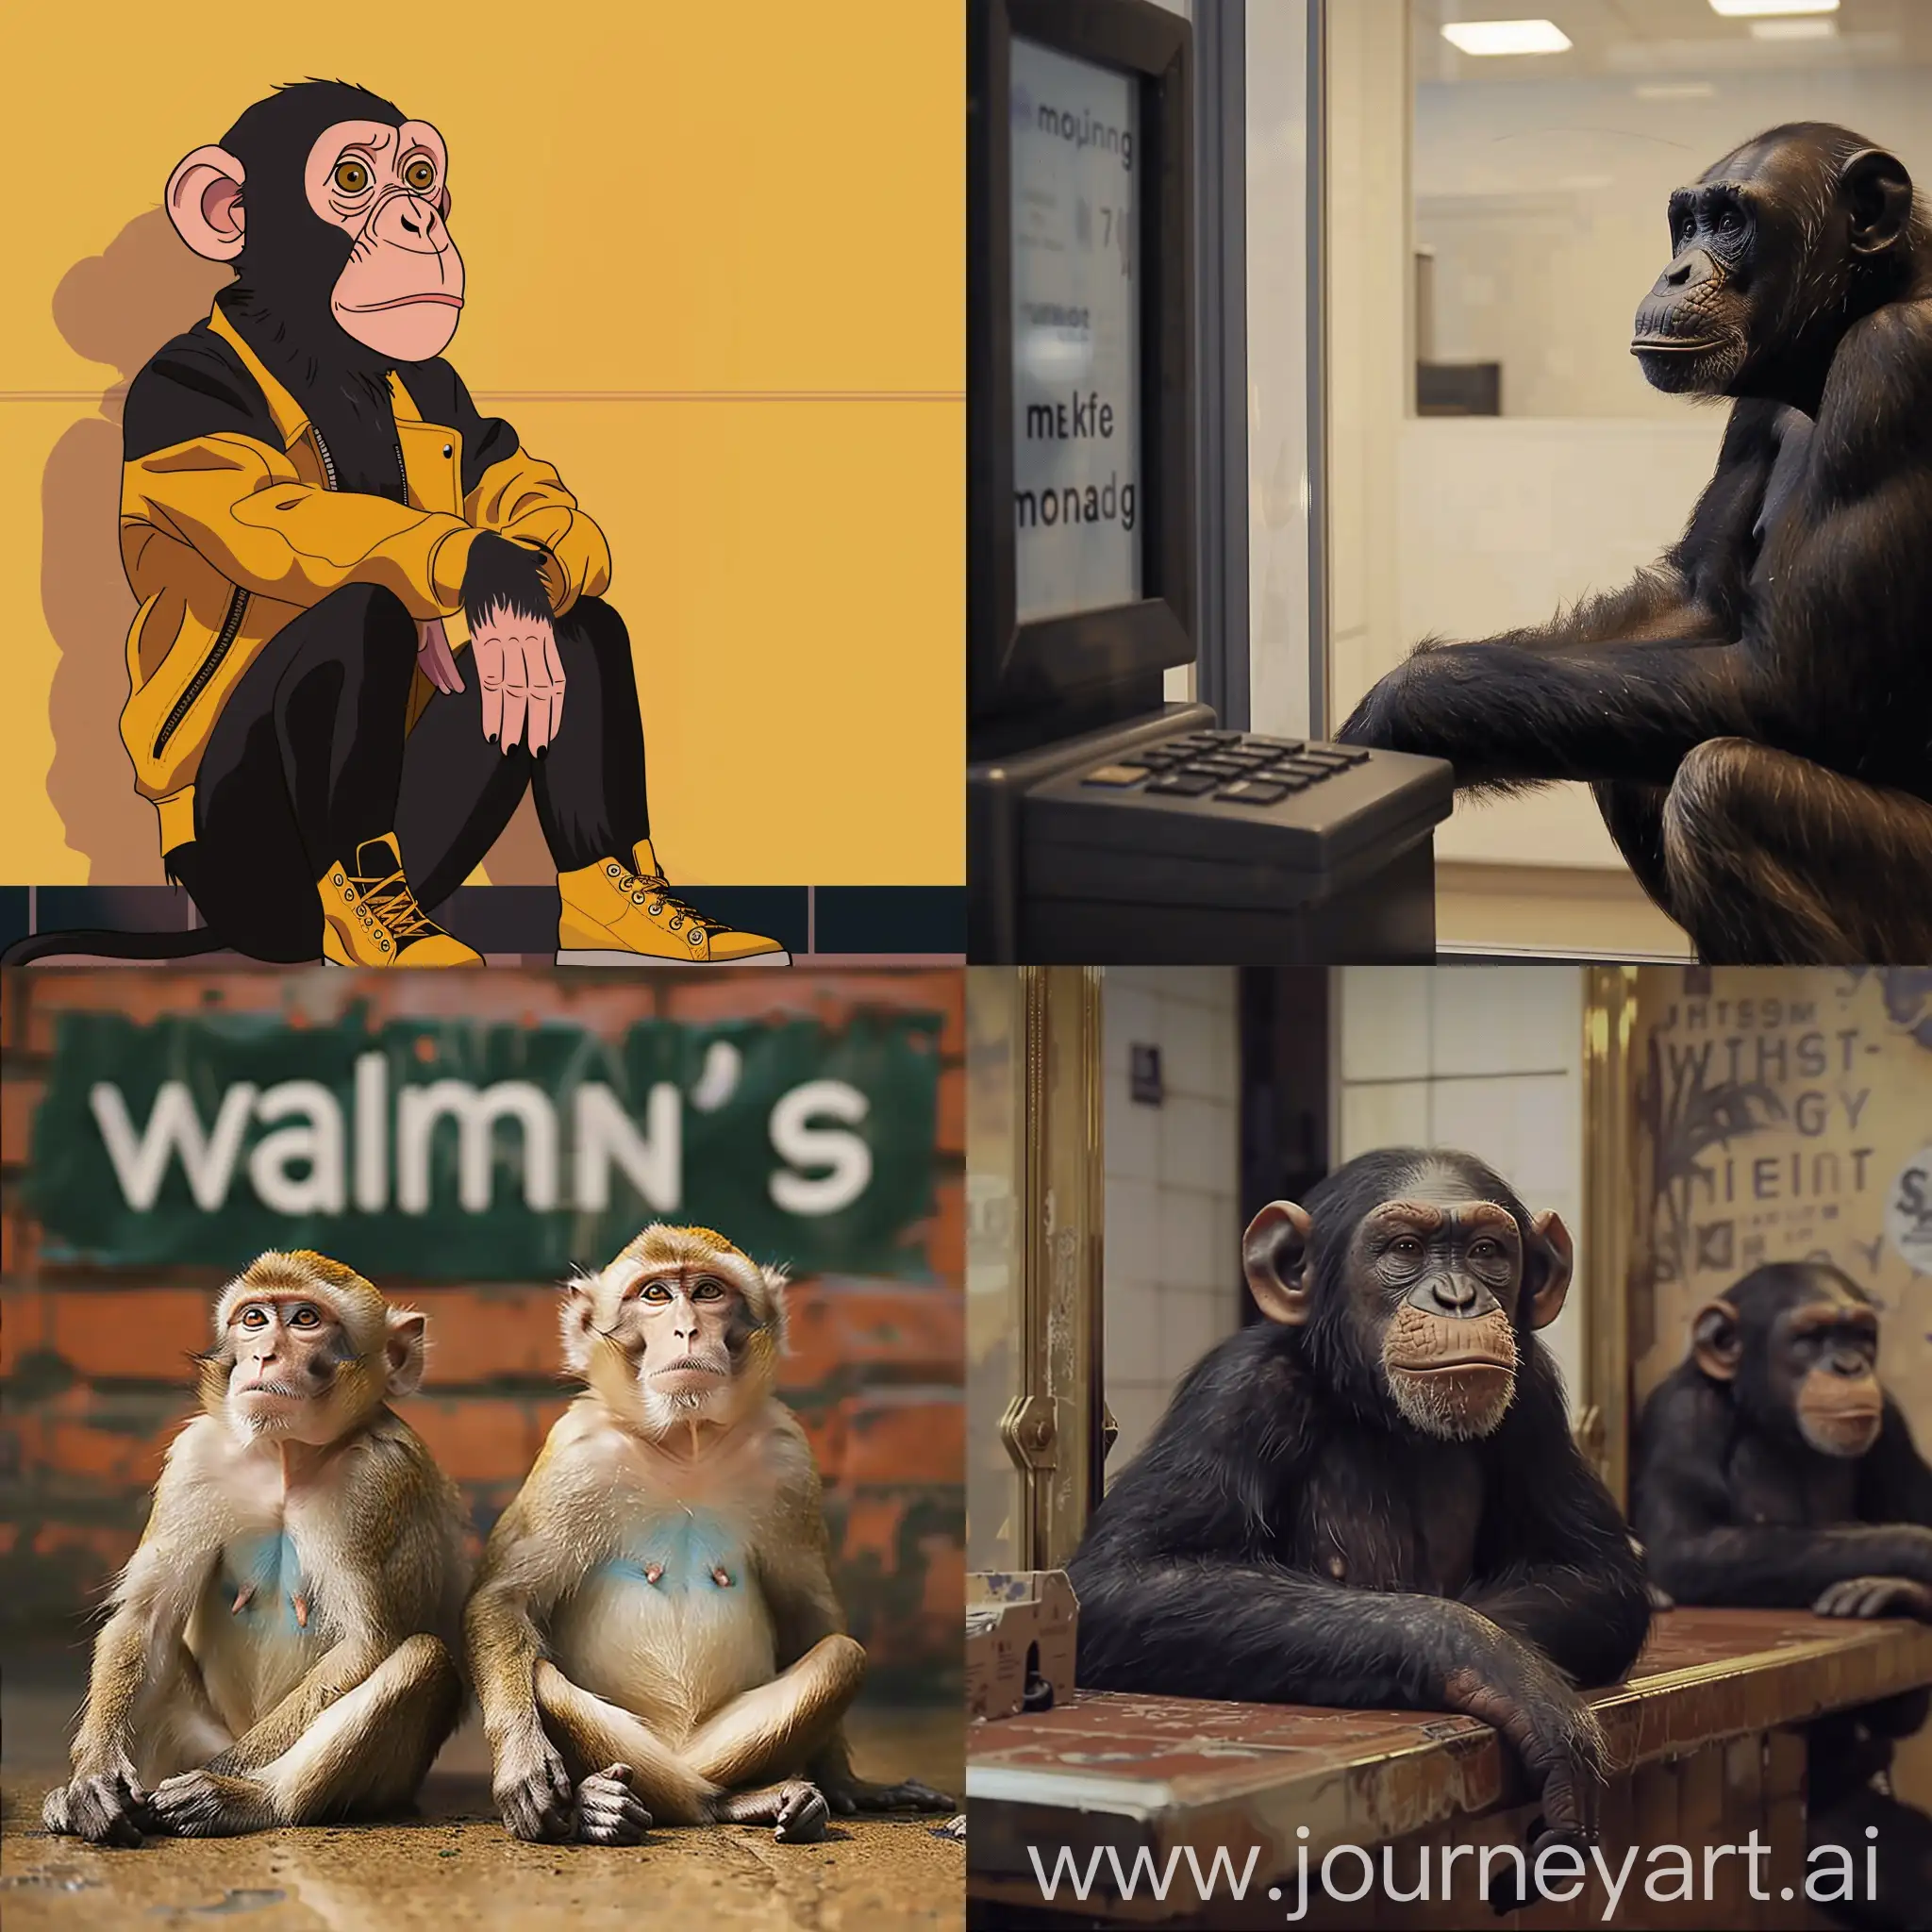 Monkeys-Waiting-for-Payment-Playful-Primate-GIF